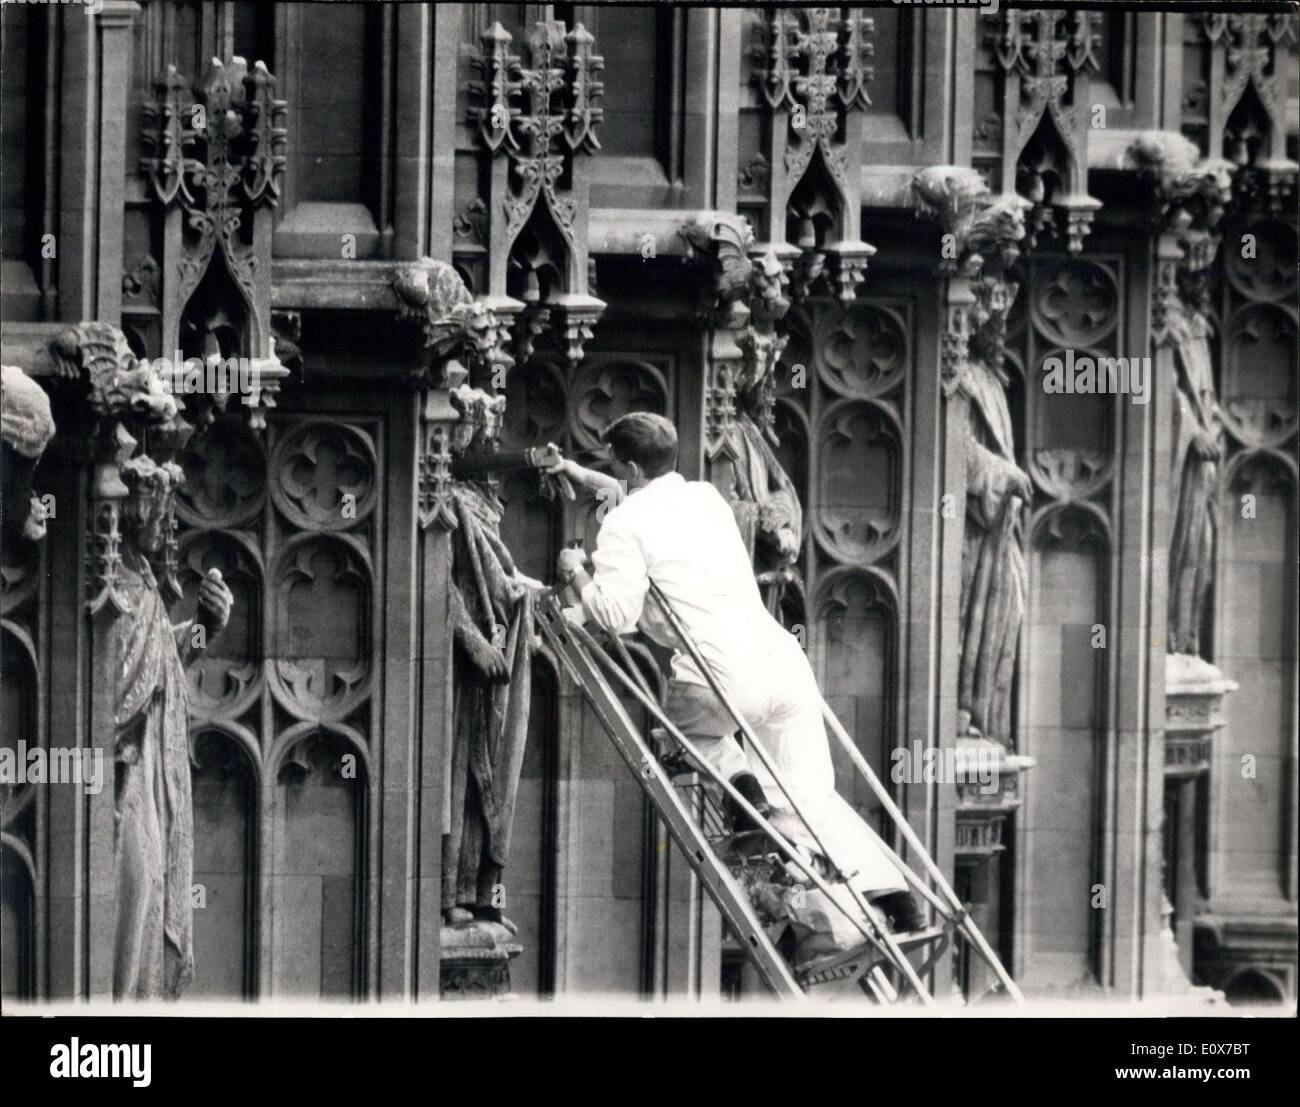 Aug. 26, 1965 - Effort to Rid Parliament of Pigeons.: As part of a plan to rid Parliament and Westminster of pigeons, workmen, armed with guns filled with plastic jelly, squirted jelly round the crowns of the statues of King and Queens, and the coronets of dukes and duchesses, on the colonnades in New Palace Yard , by order of the Ministry of Public Building and Works. The workmen used a 100 -foot fire engine ladder for the task Stock Photo